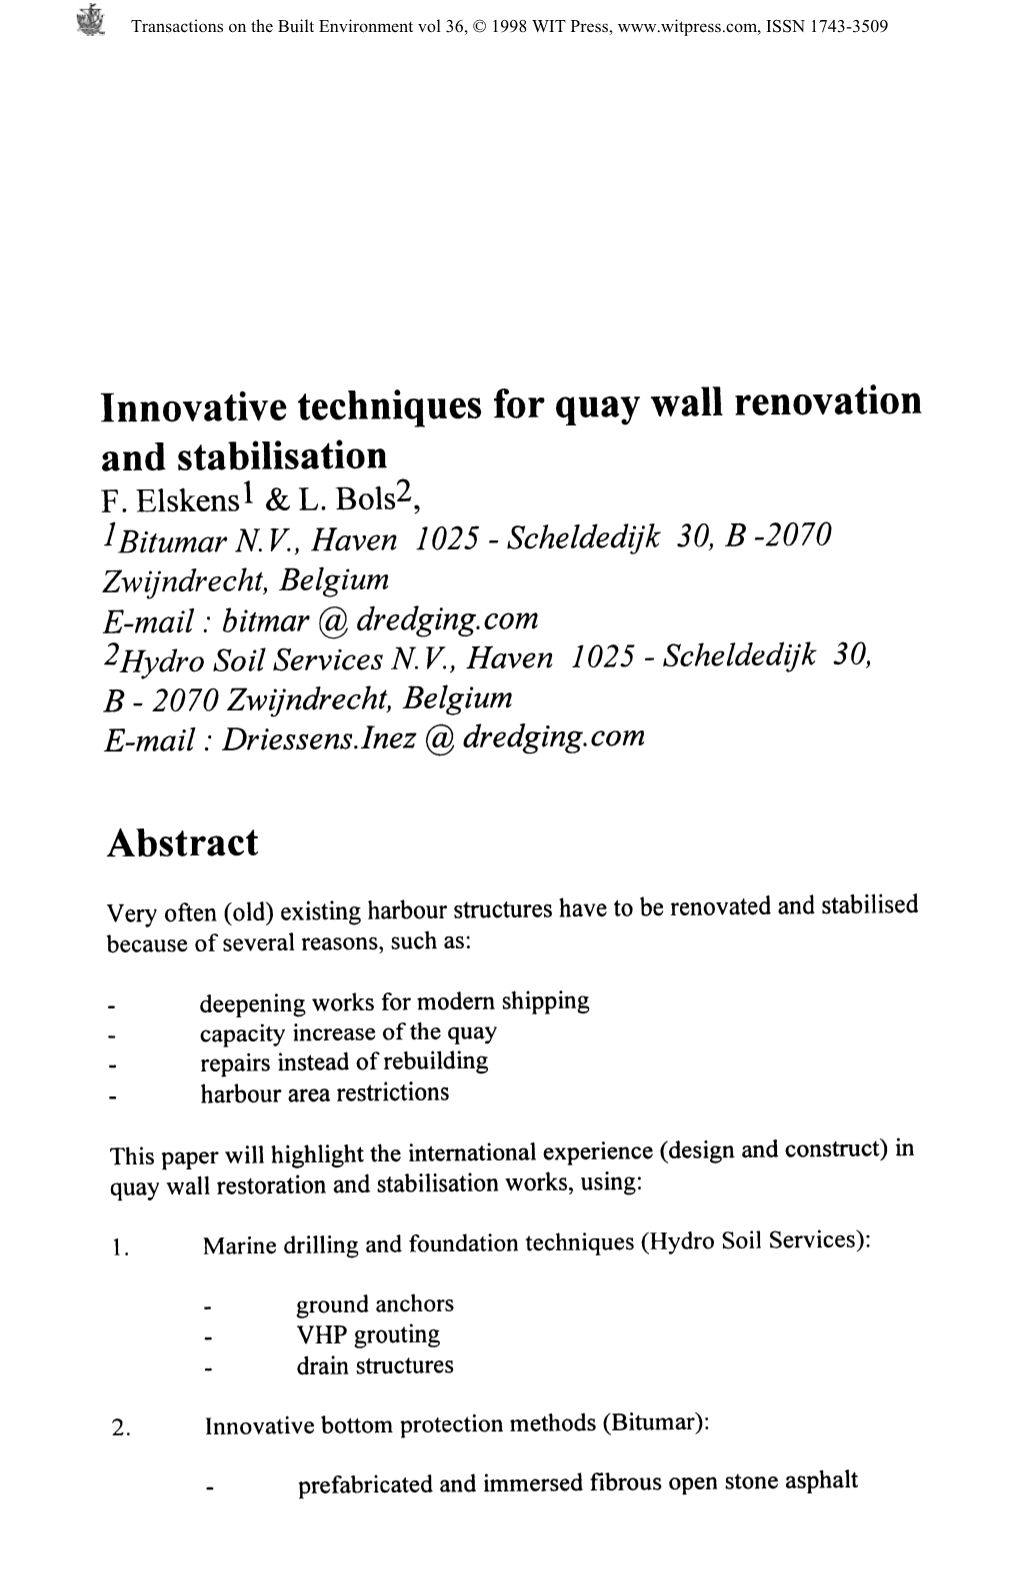 Innovative Techniques for Quay Wall Renovation And